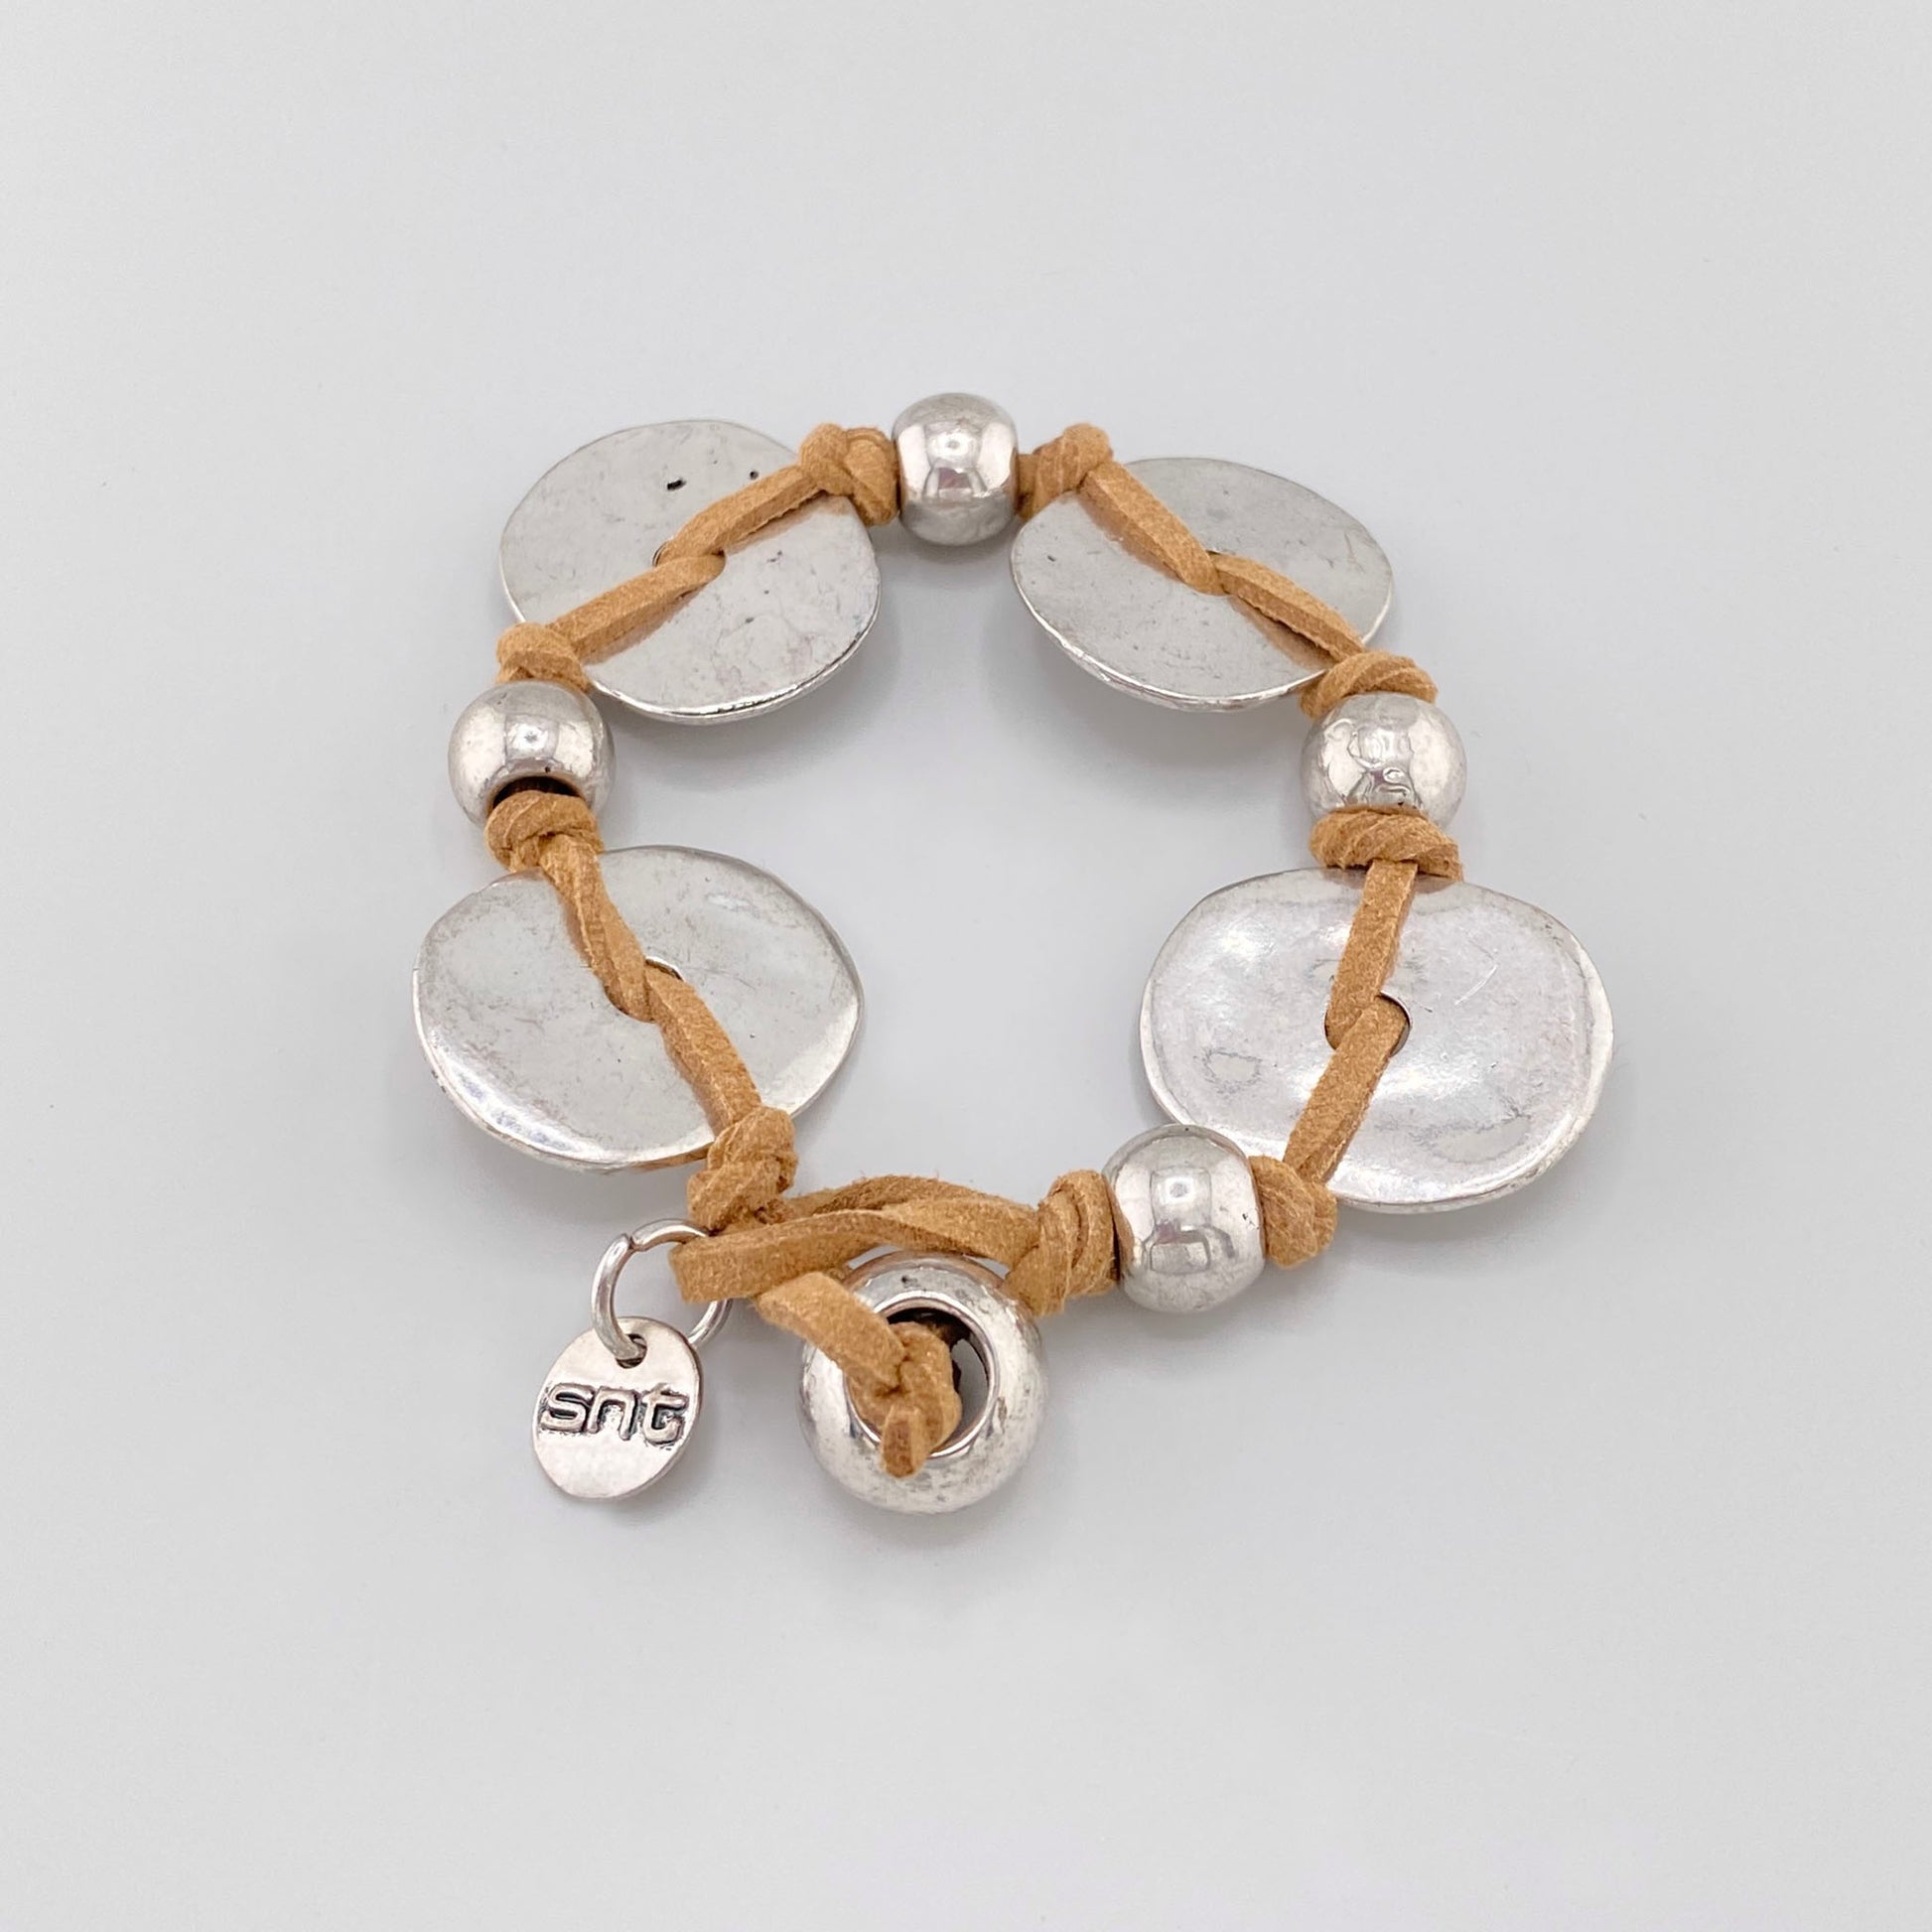 Bracelet with rings